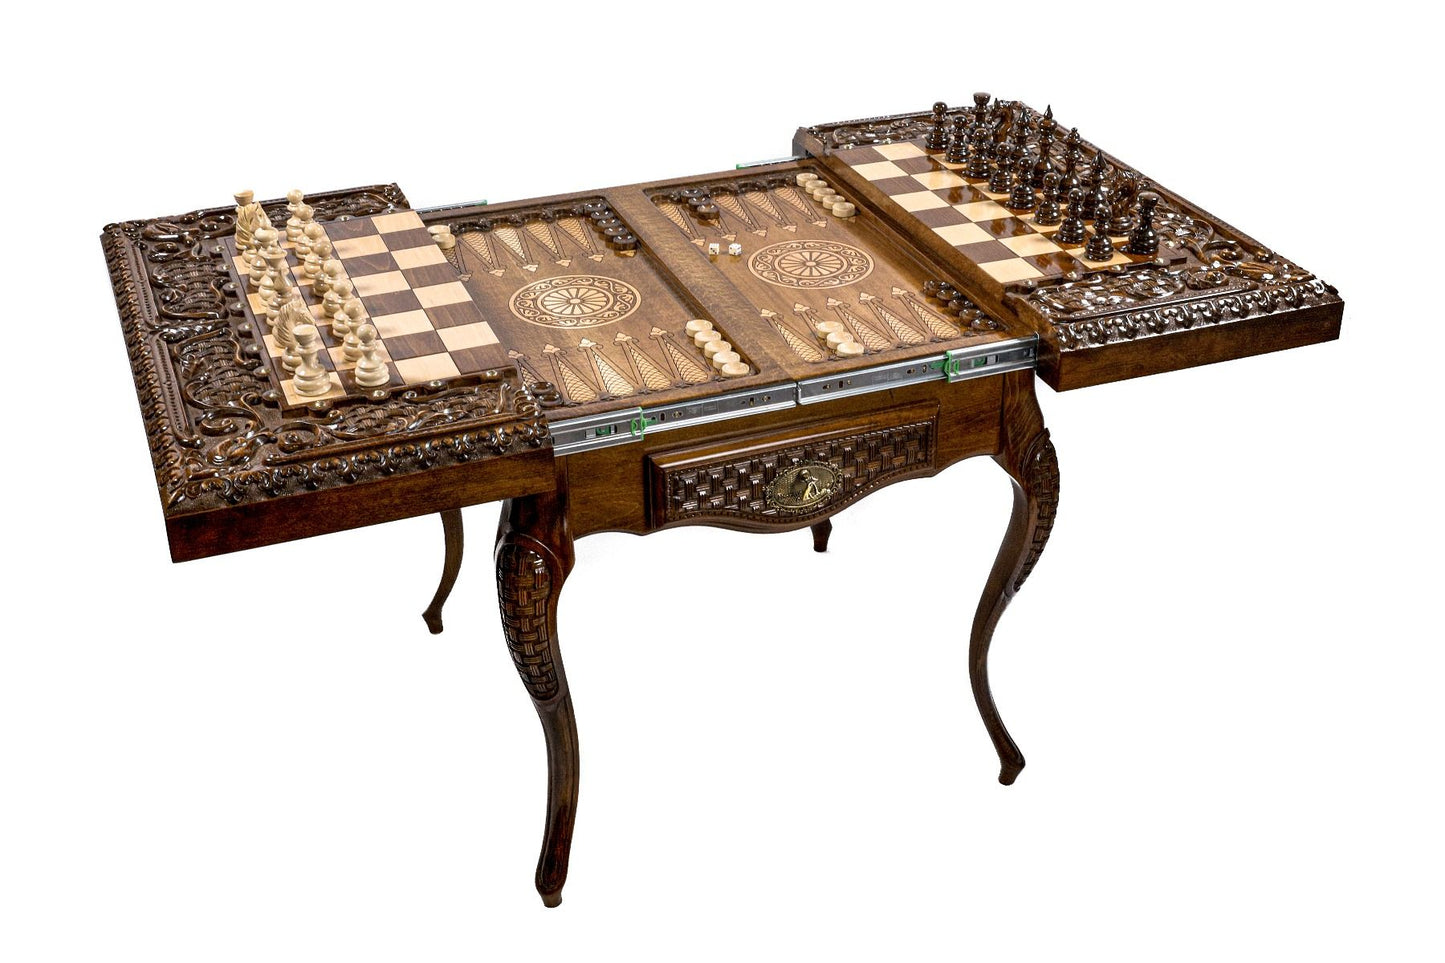 Detailed image of the hand-polished surface of the 'Opulent Dual-Play' table, showing the contrast between the chess and backgammon sides.